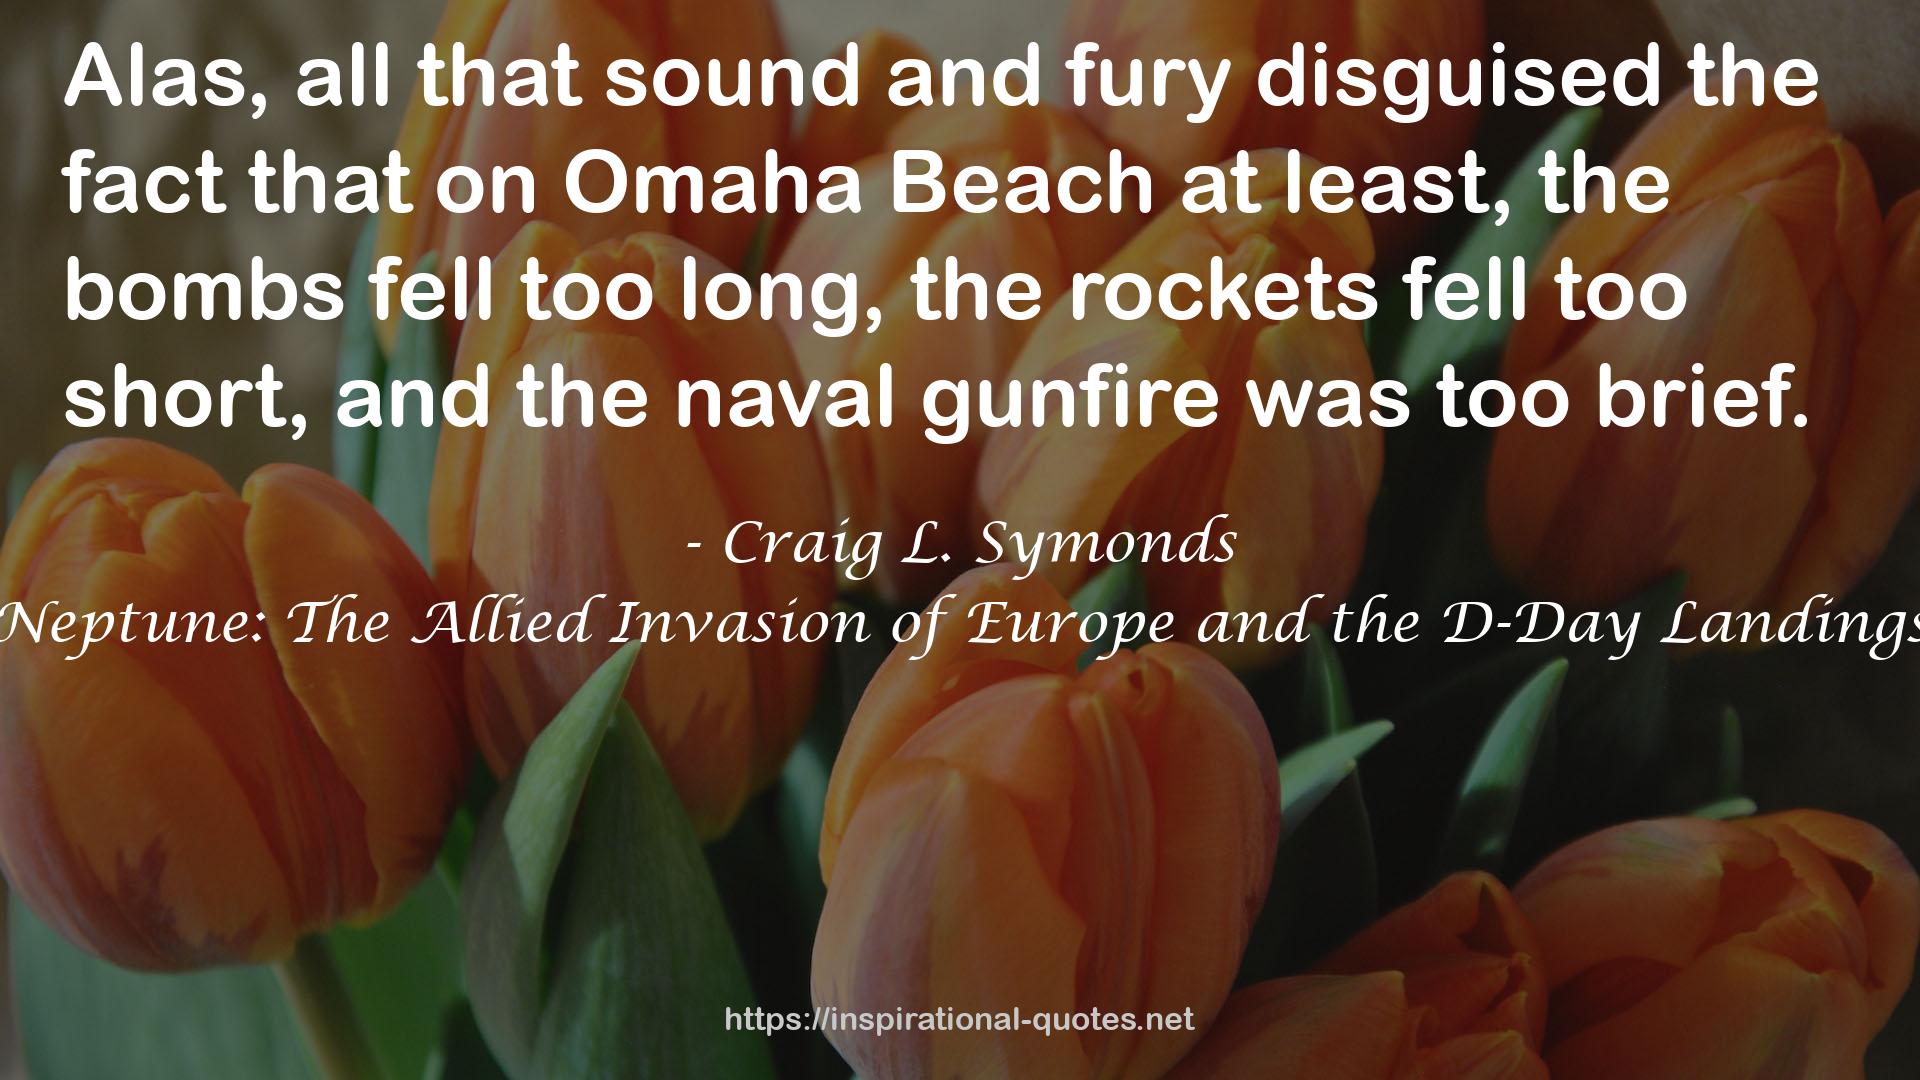 Neptune: The Allied Invasion of Europe and the D-Day Landings QUOTES